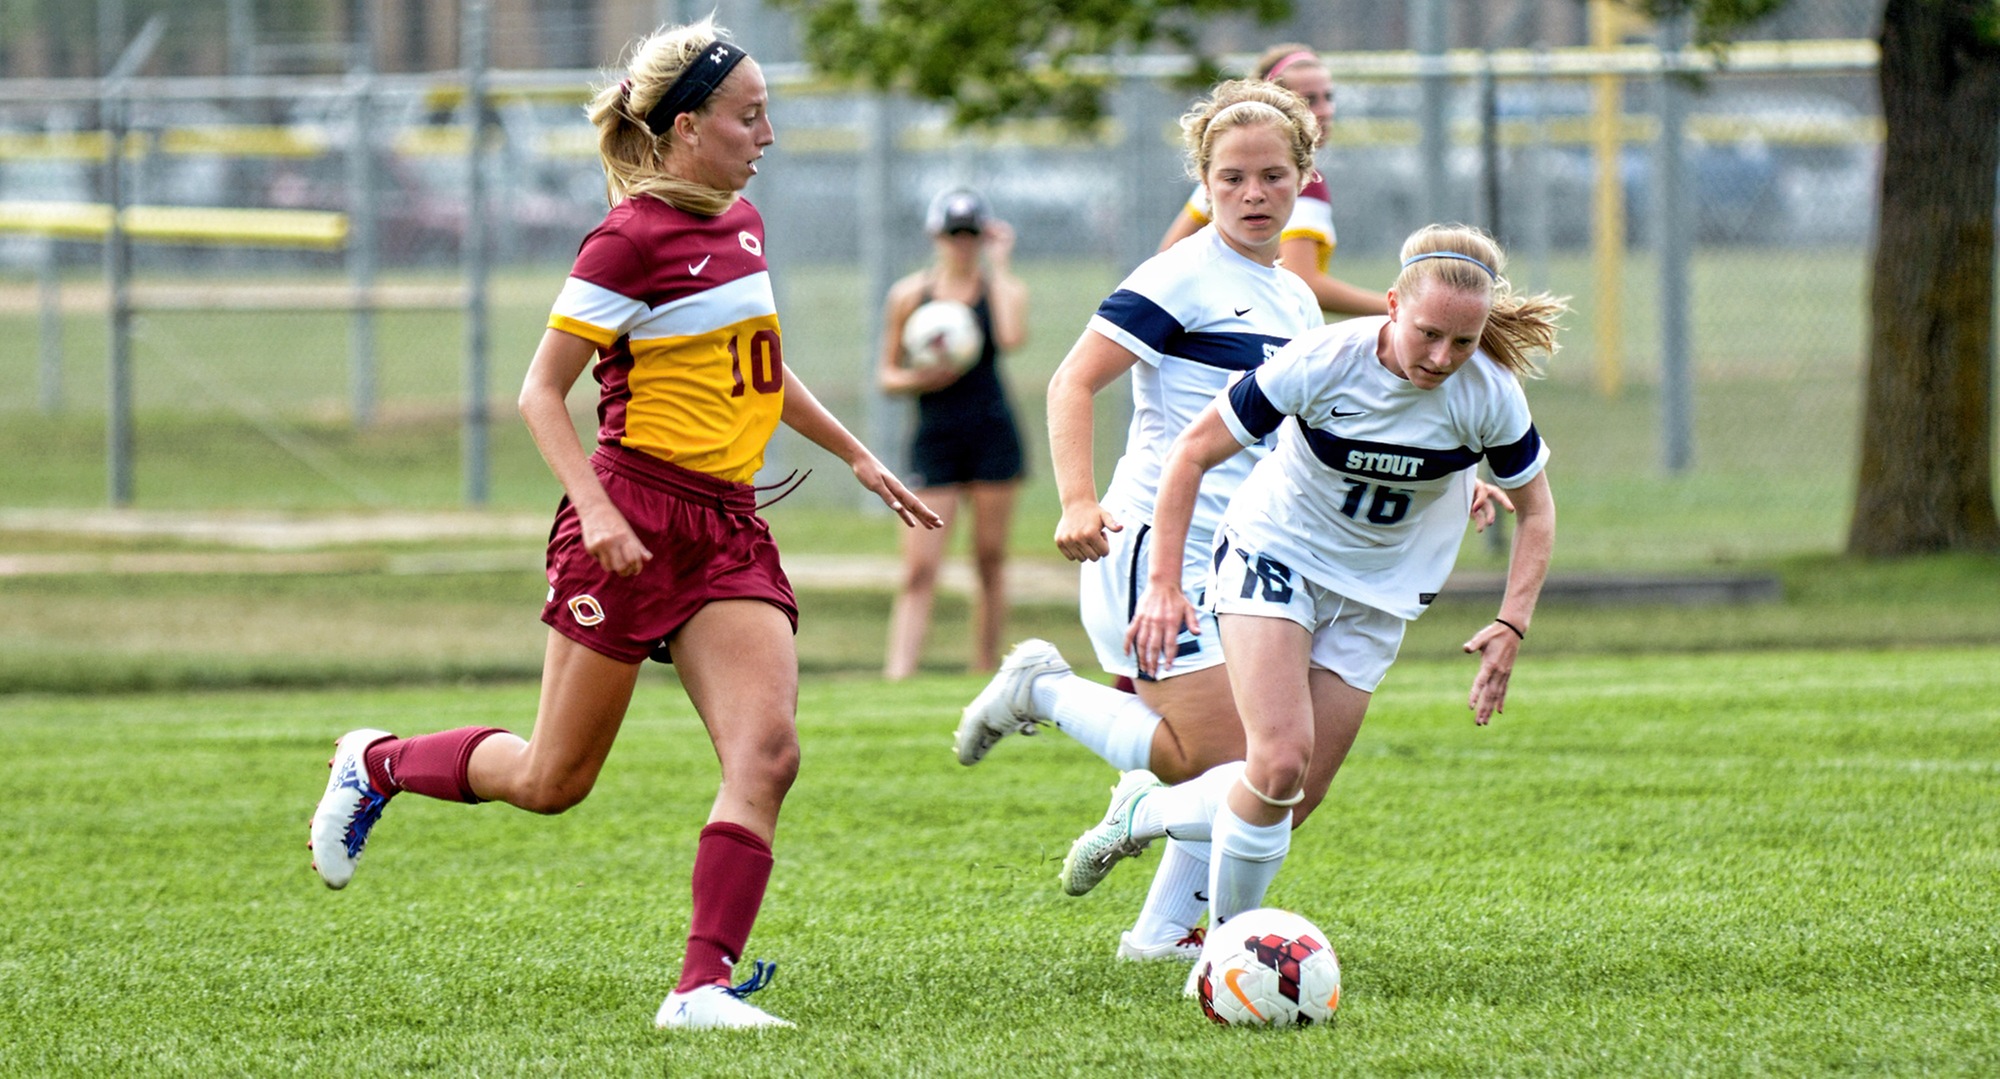 Senior Kayla Dostal led Concordia with two shots in the Cobbers' 0-0 2OT tie at Wis.-Stout.